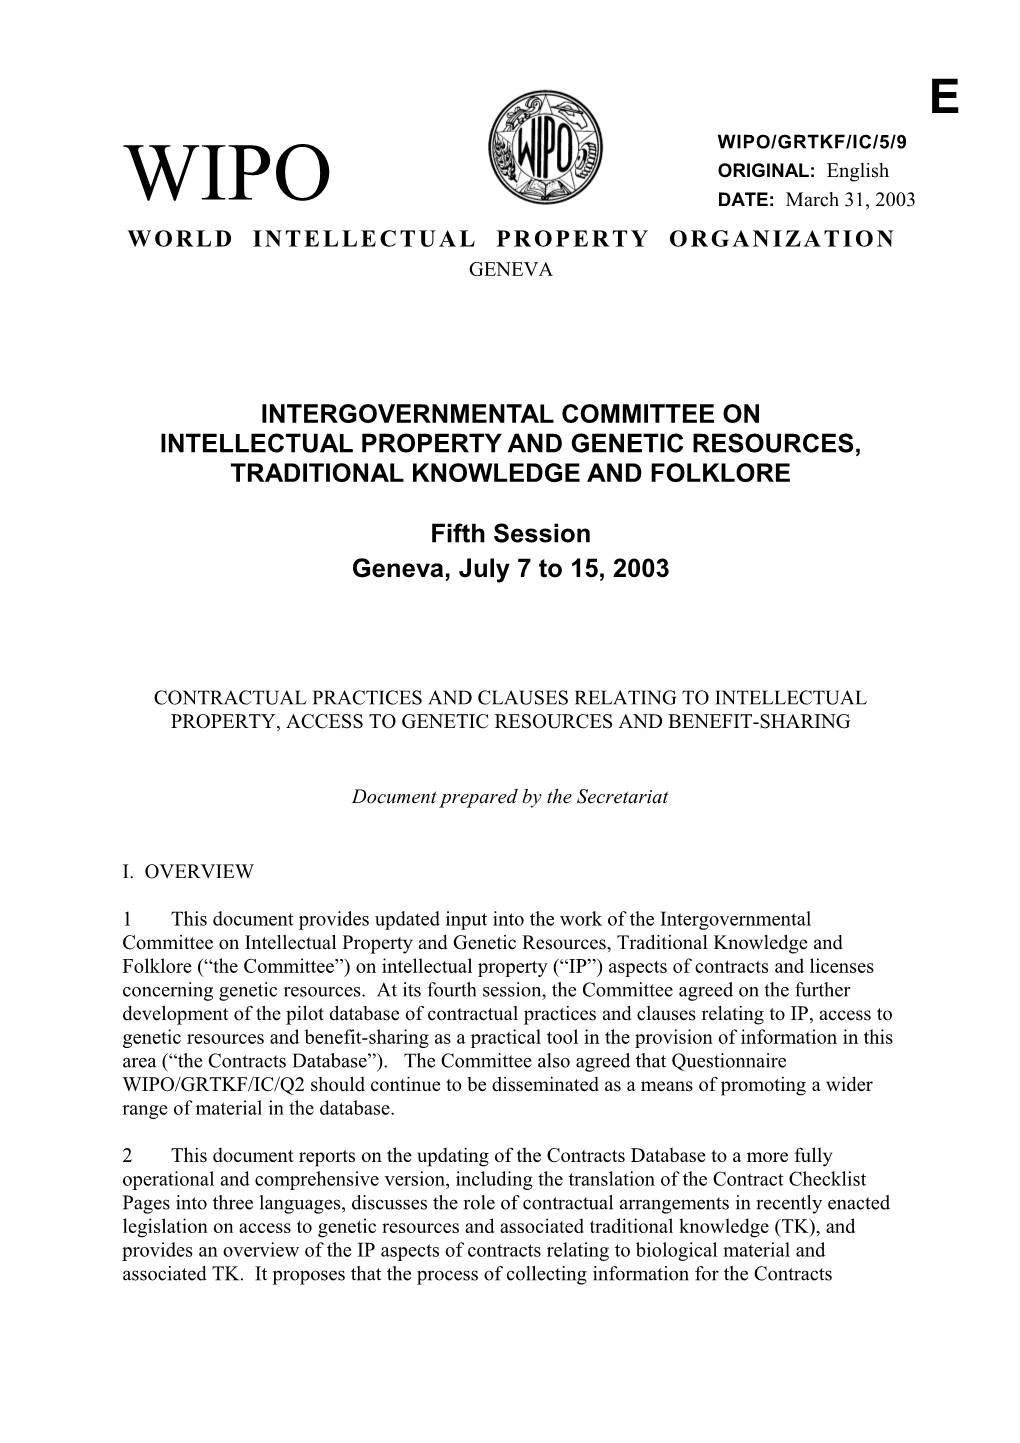 WIPO/GRTKF/IC/5/9: Contractual Practices and Clauses Relating to Intellectual Property